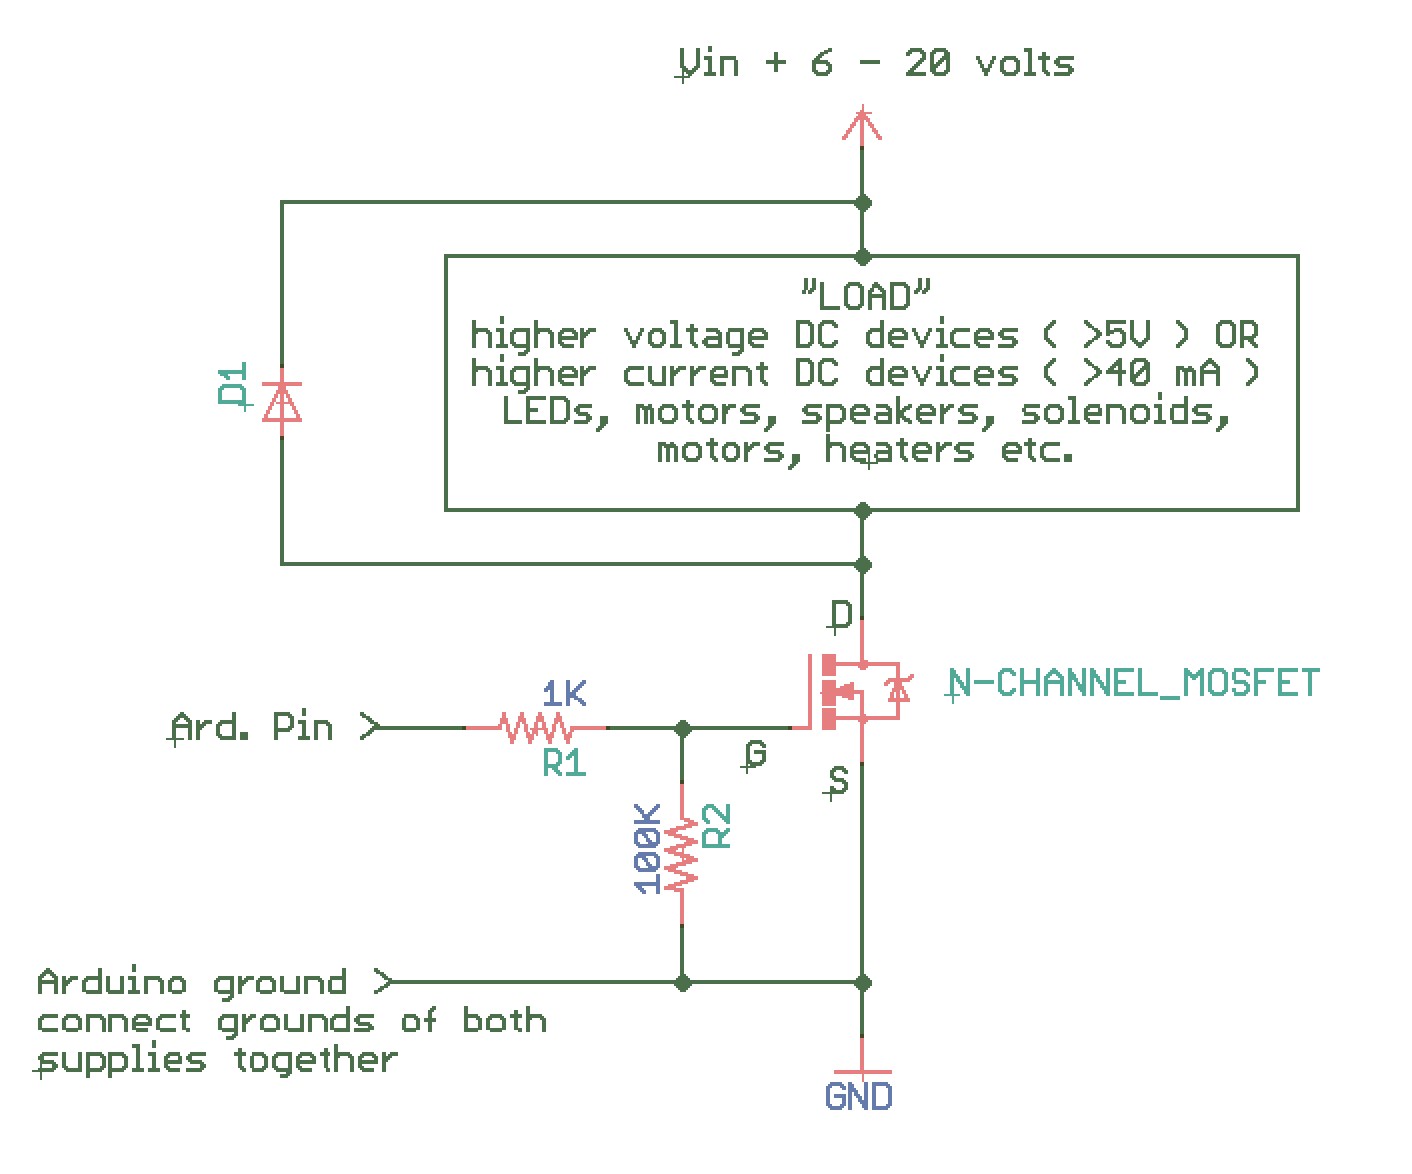 N channel MOSFET wired as a high current or high voltage switch R2 is a pulldown resistor to keep the switch off if there is no input it should have a